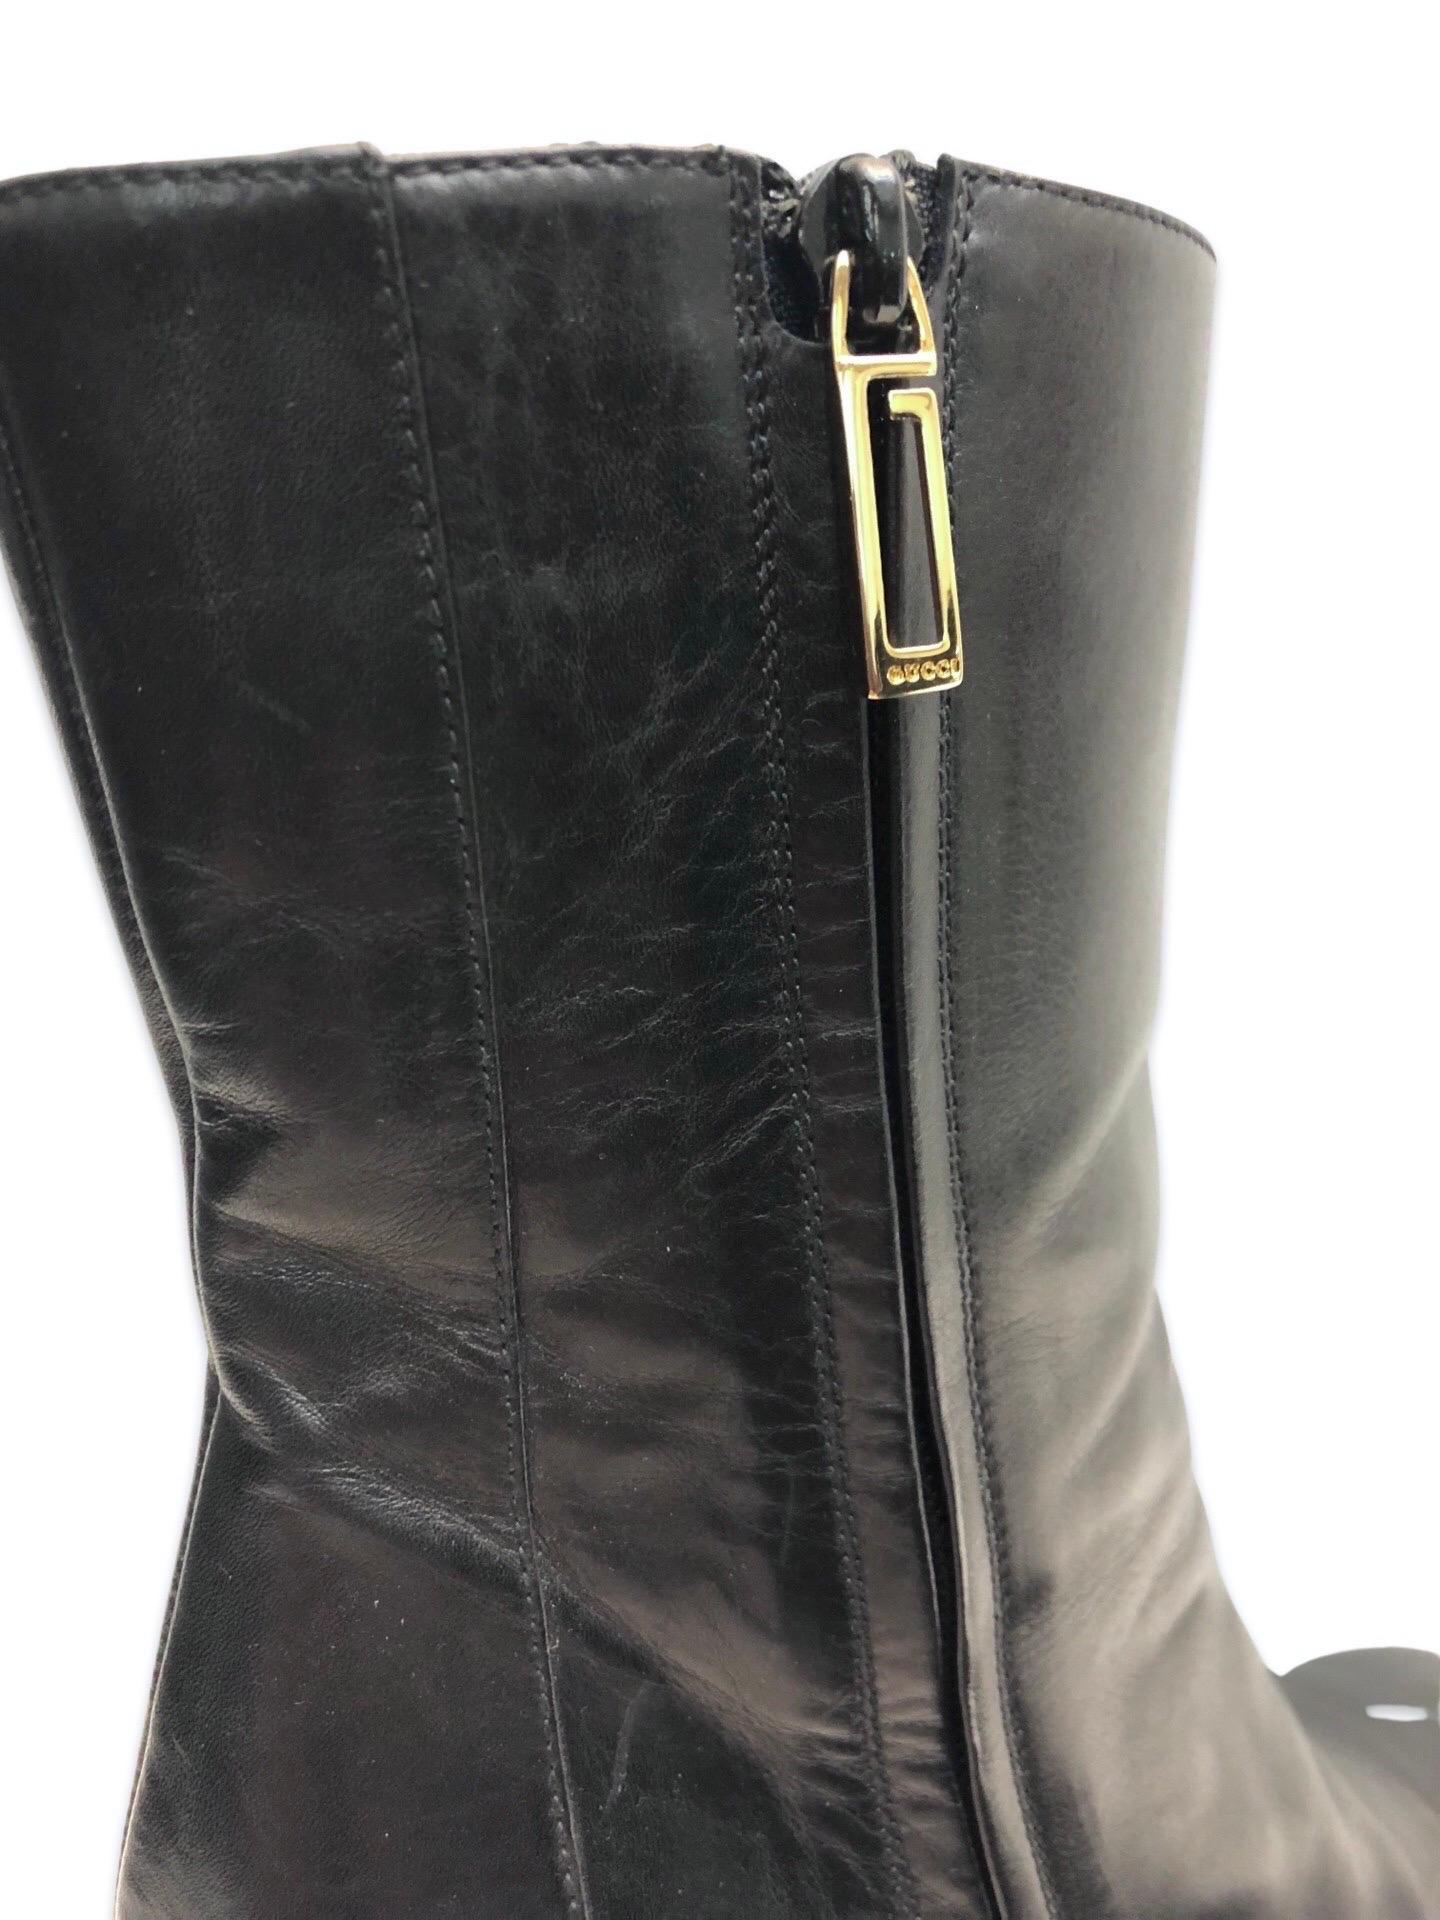 - Gucci by Tom Ford black leather square toe ankle boots in excellent condition. 

- Featuring gold toned hardware 